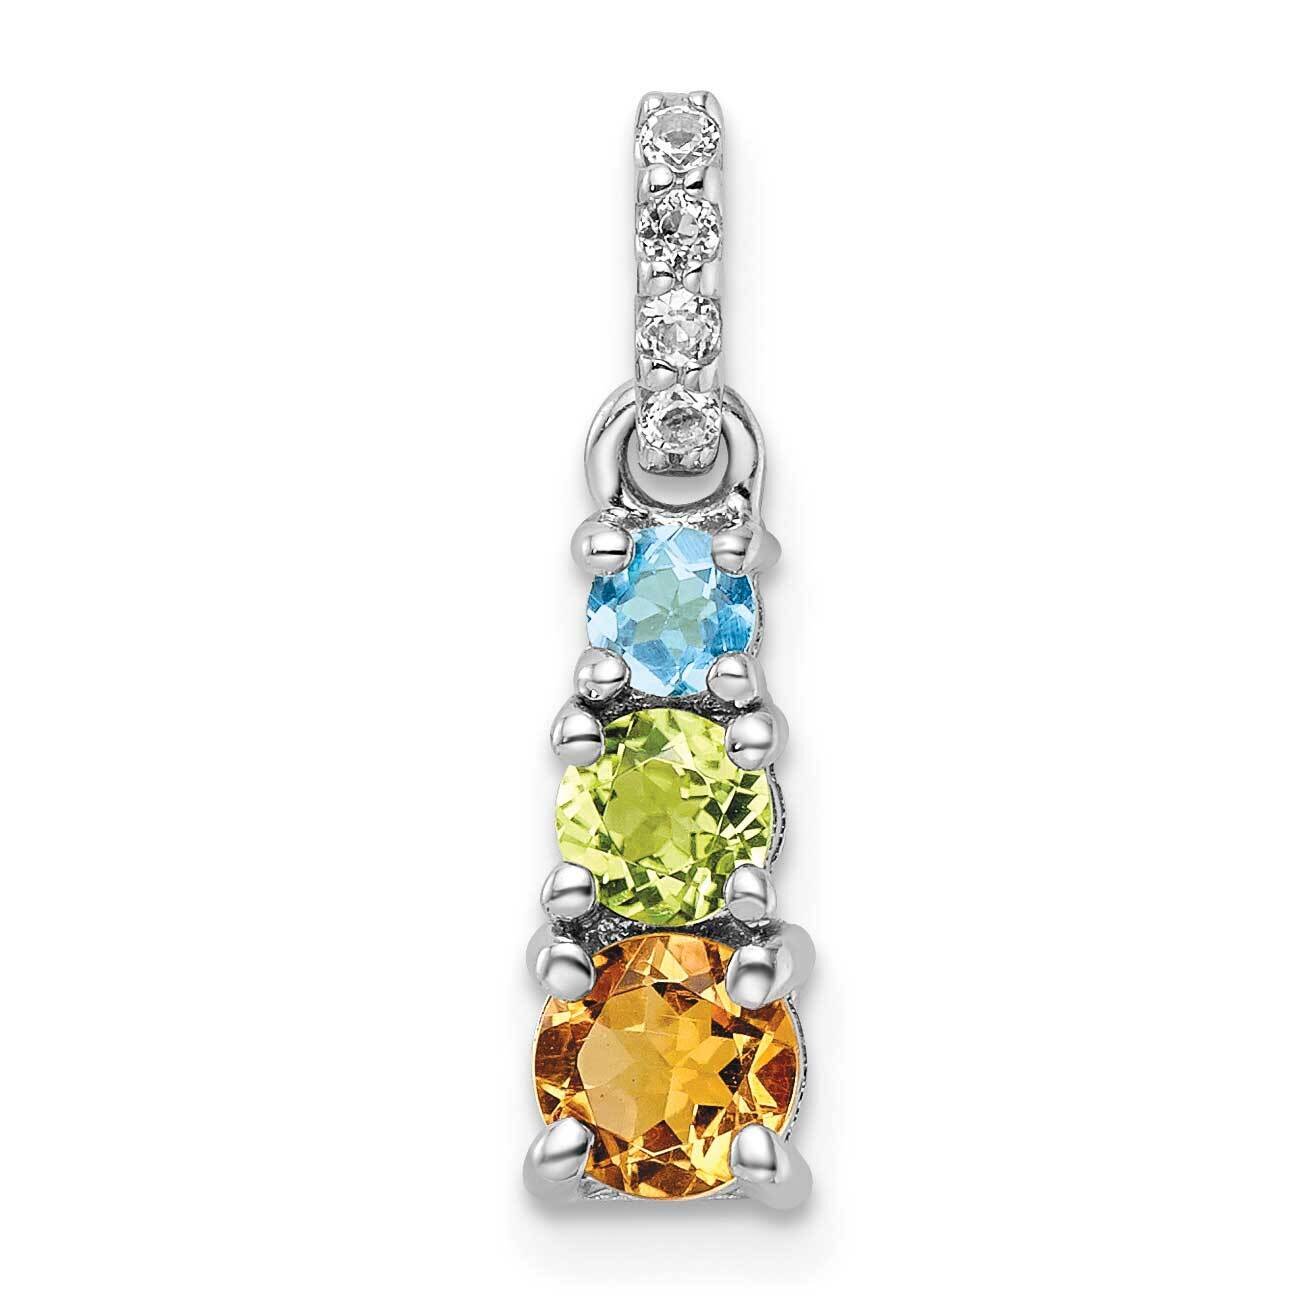 .78T.W. Pe Ci Lsbt Wt 3-Stone Pendant Sterling Silver Rhodium-Plated QP5717RB